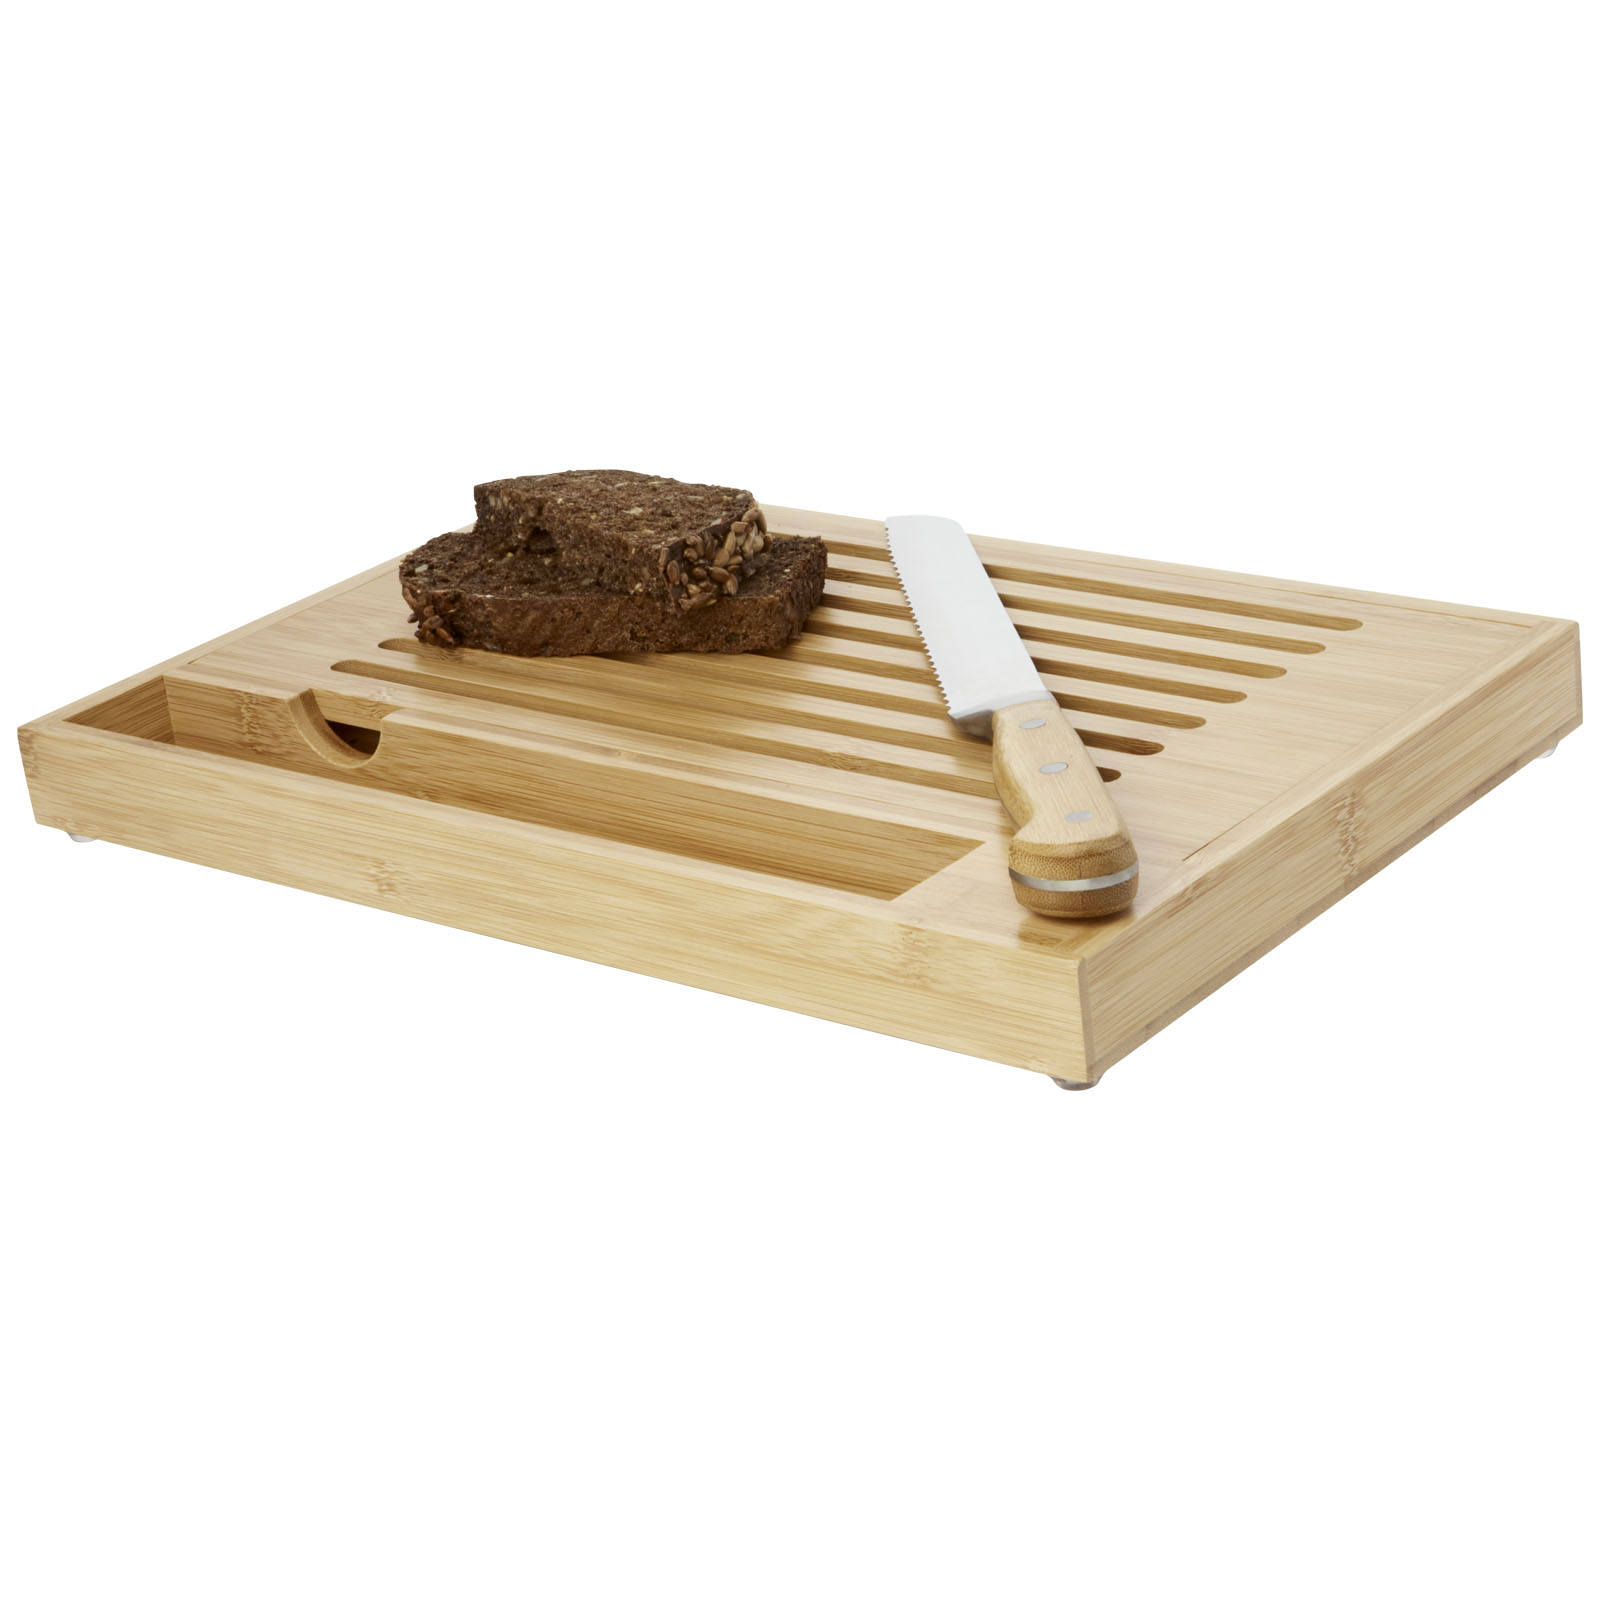 Home & Kitchen - Pao bamboo cutting board with knife